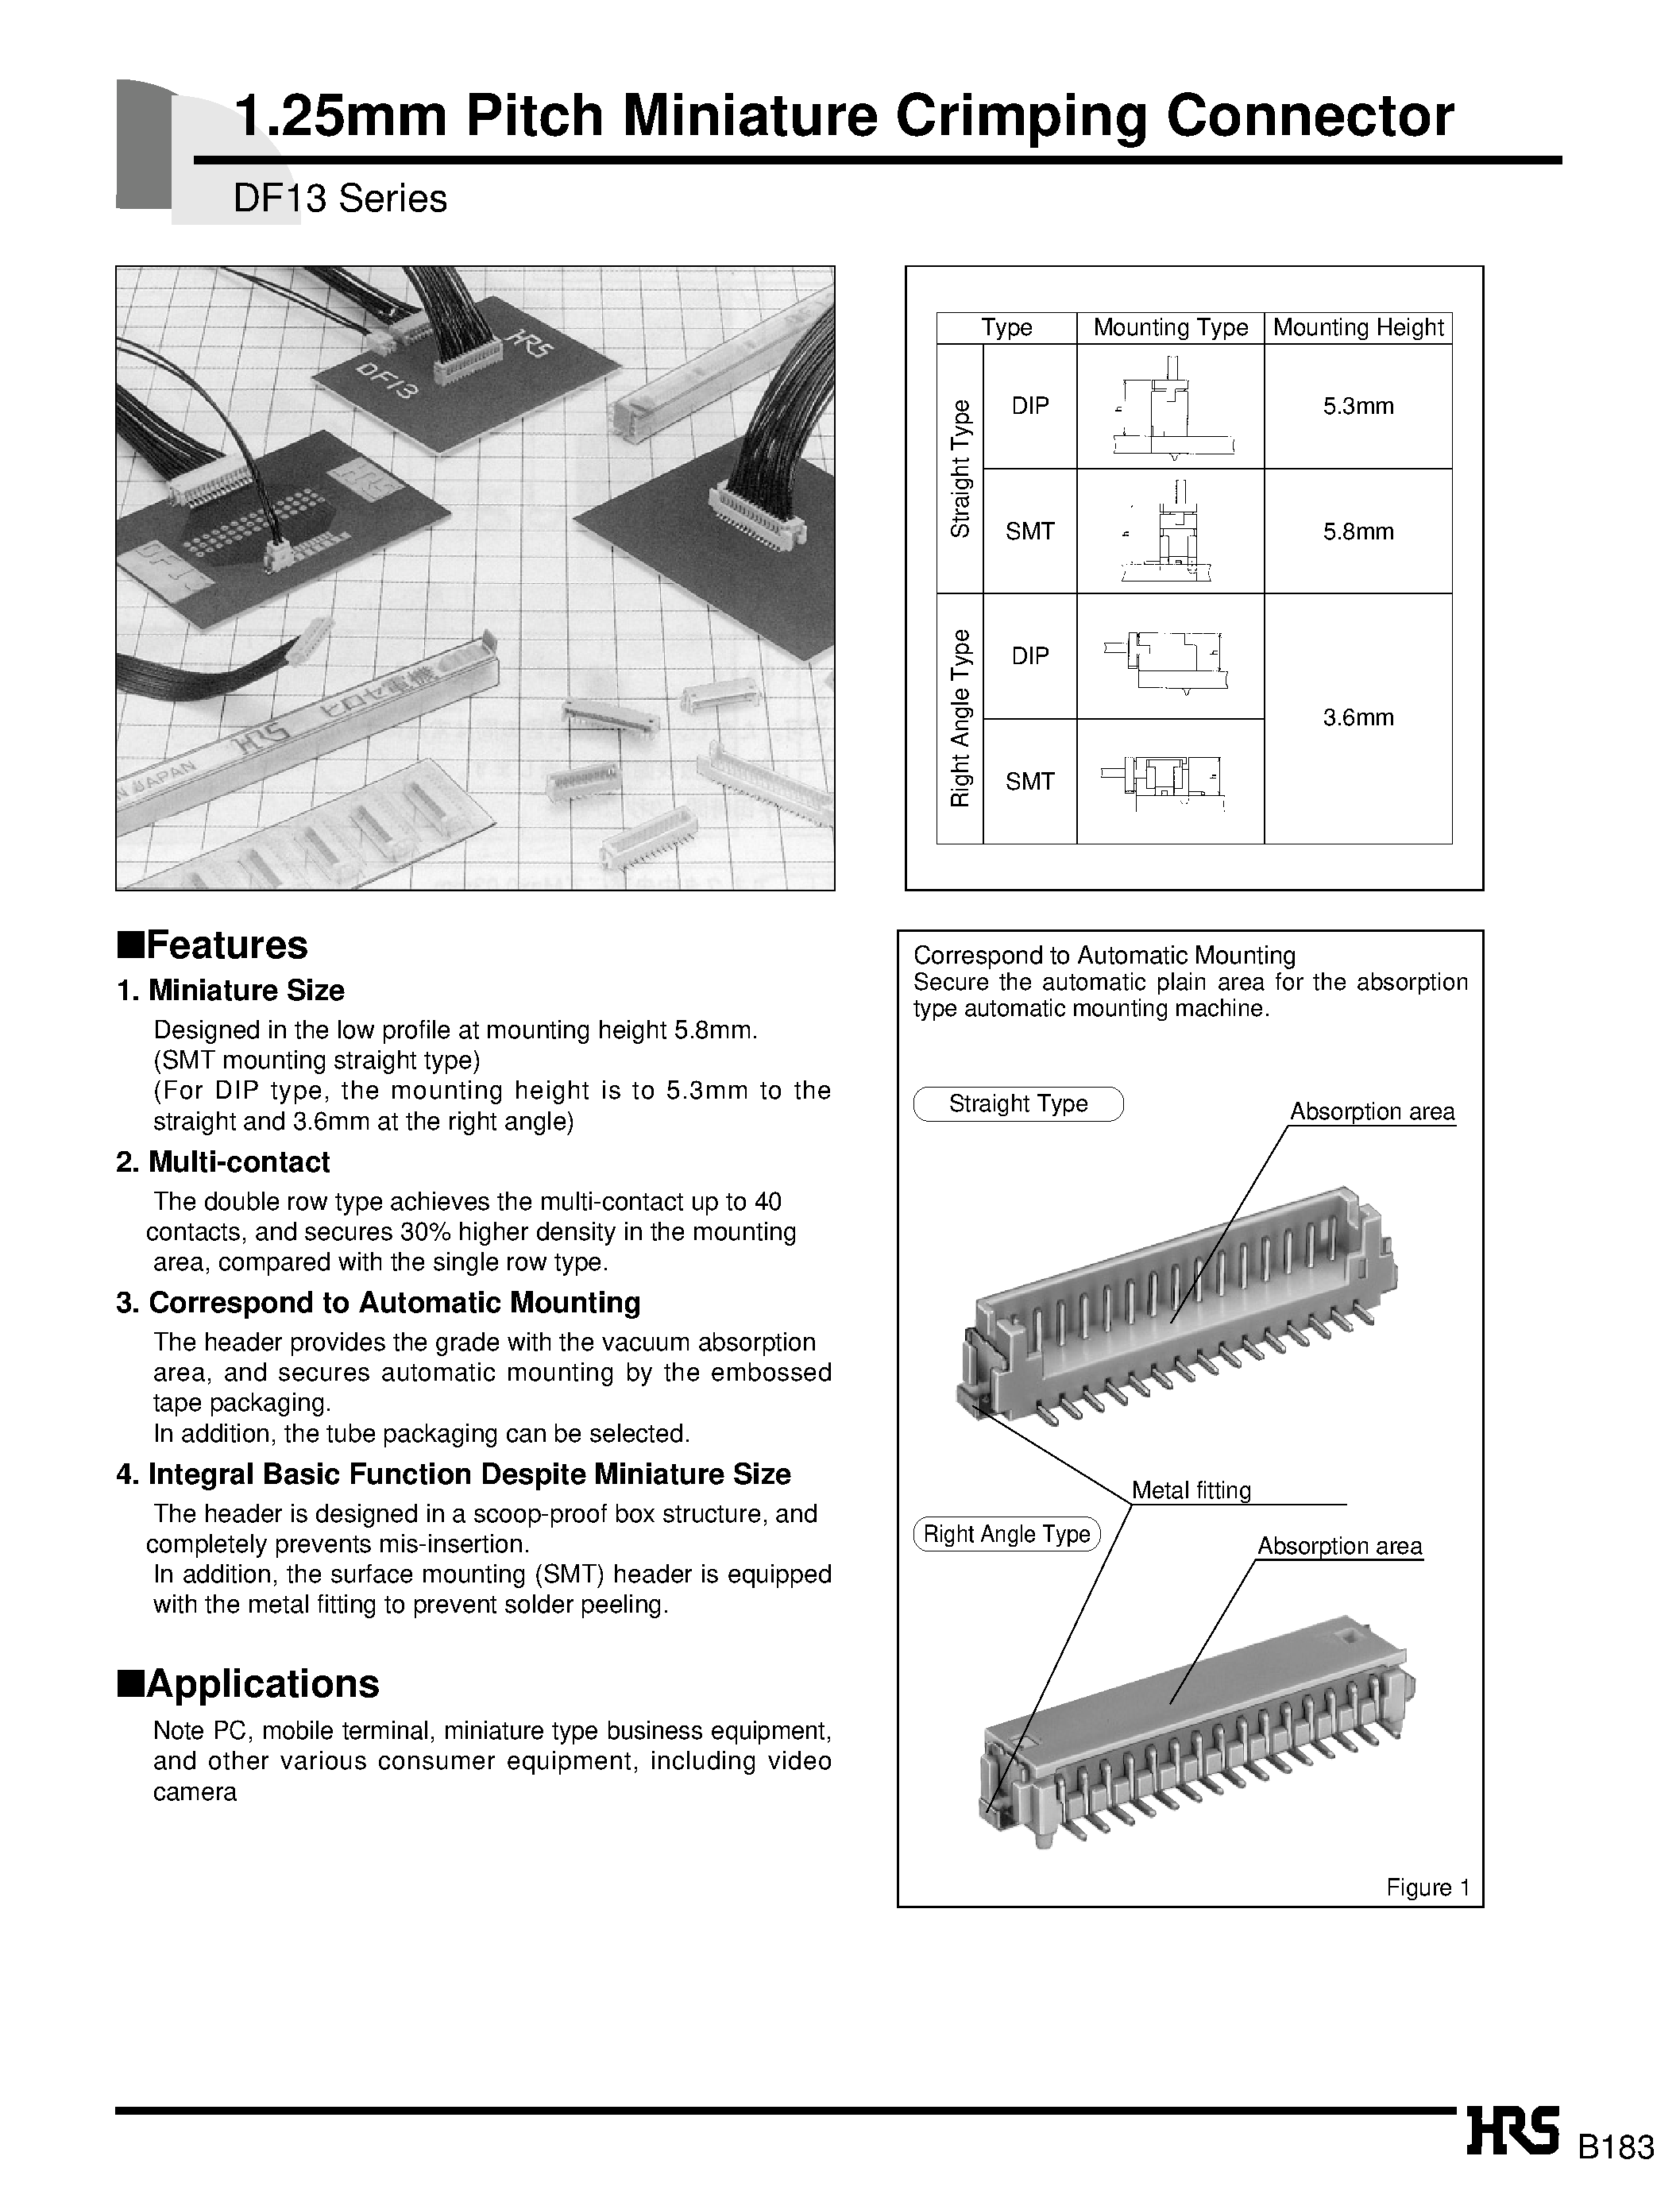 Datasheet DF13-10DP-1.25DS - 1.25mm Pitch Miniature Crimping Connector page 1